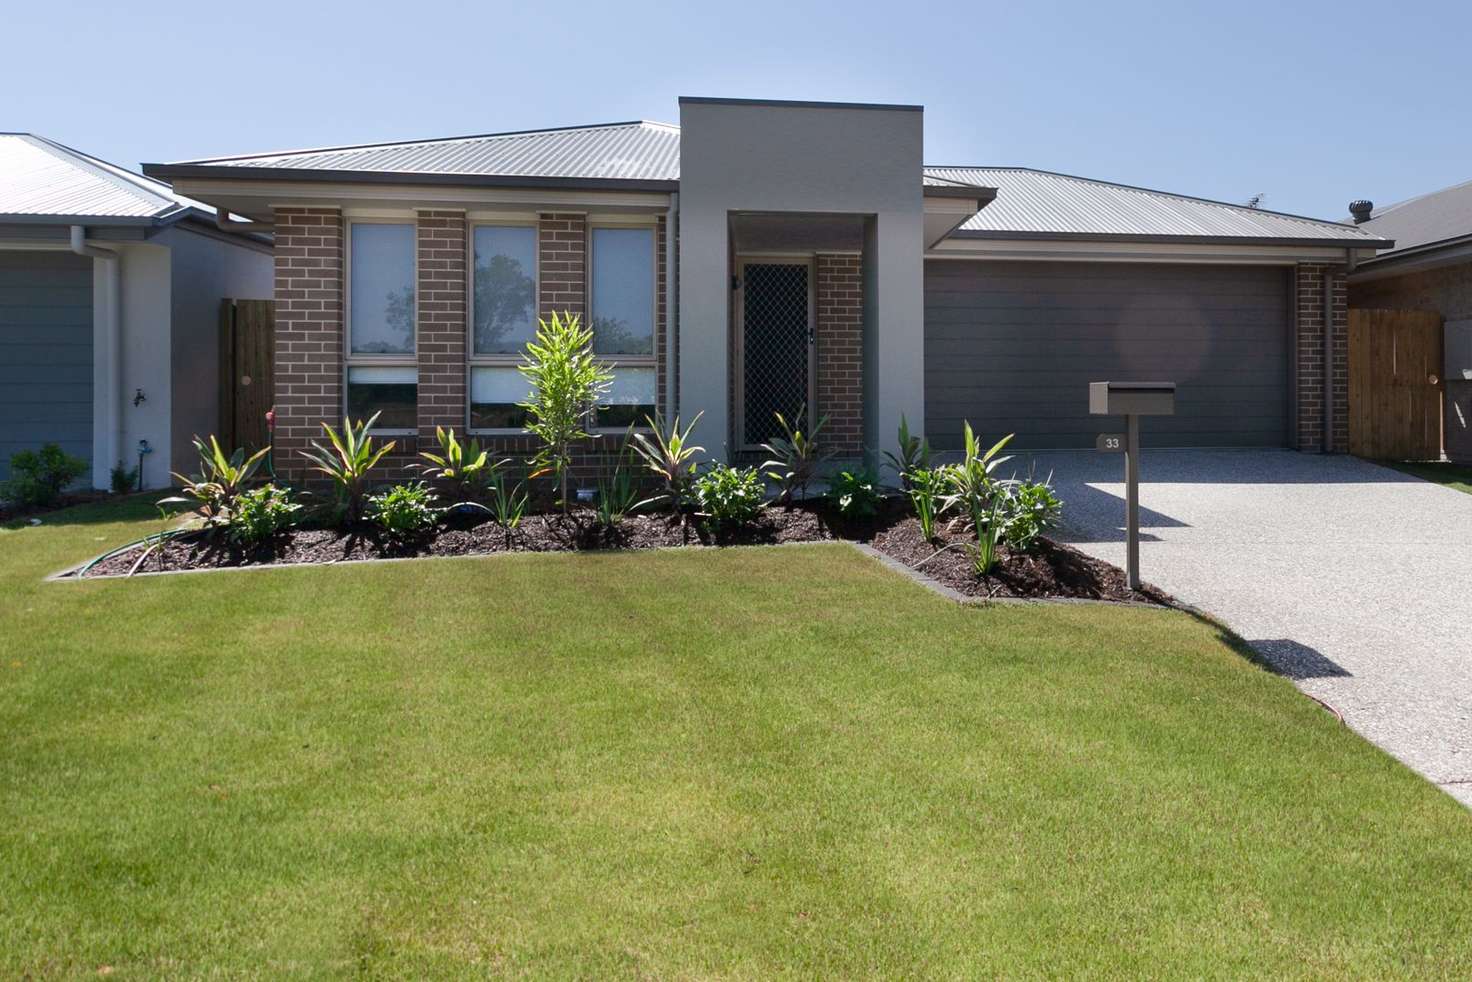 Main view of Homely house listing, 33 Fairbourne Terrace, Pimpama QLD 4209